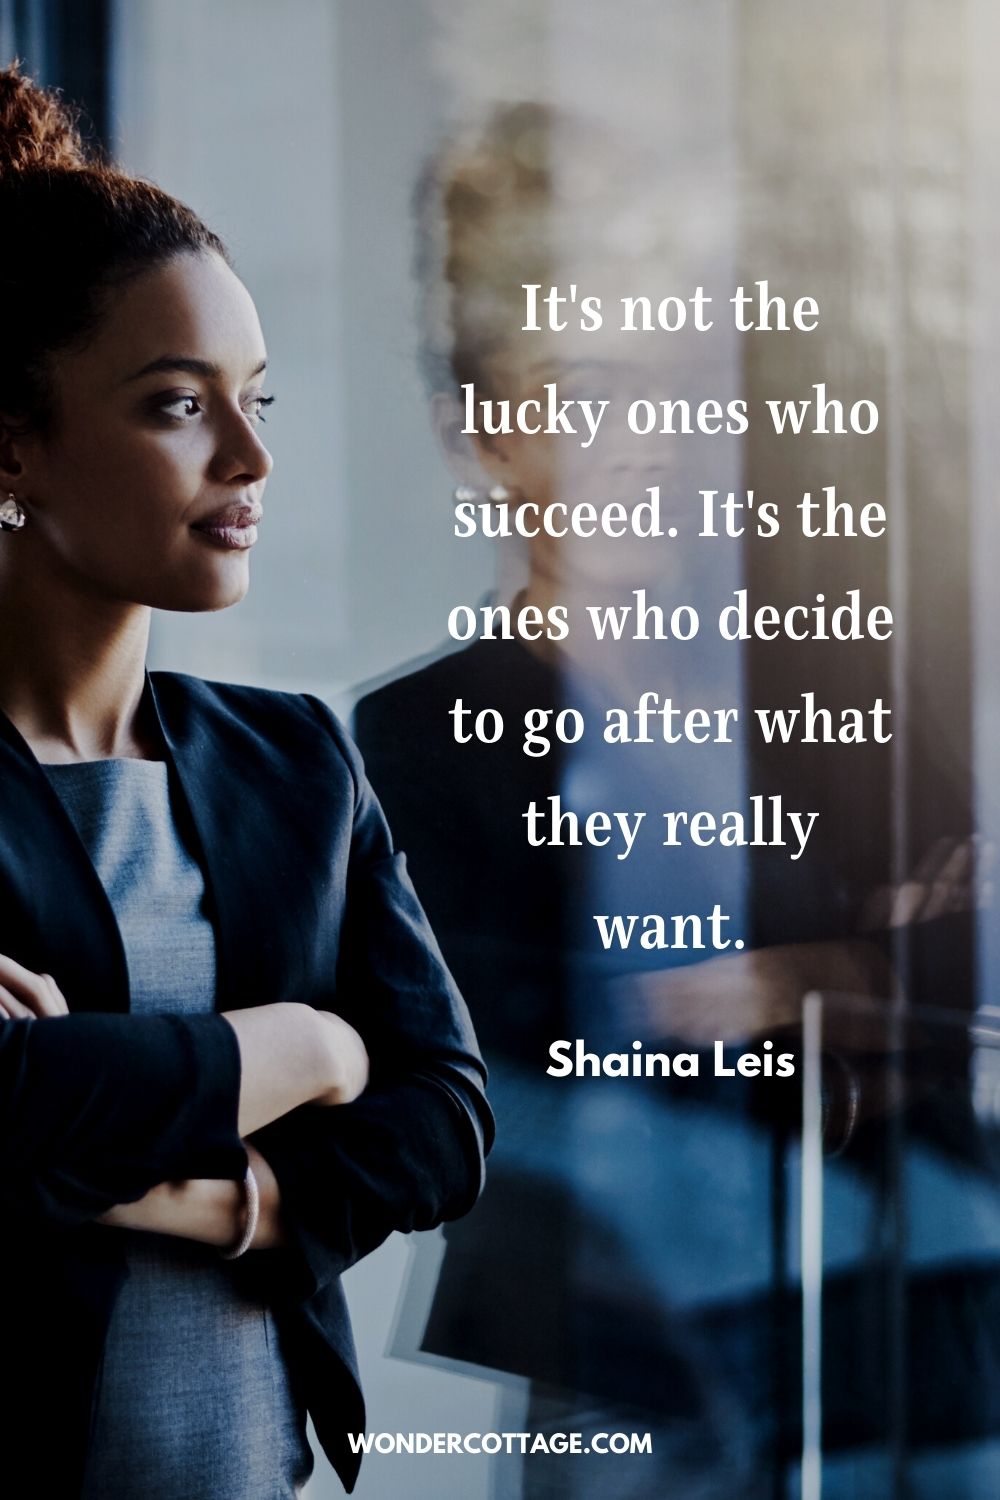 It's not the lucky ones who succeed. It's the ones who decide to go after what they really want." Shaina Leis